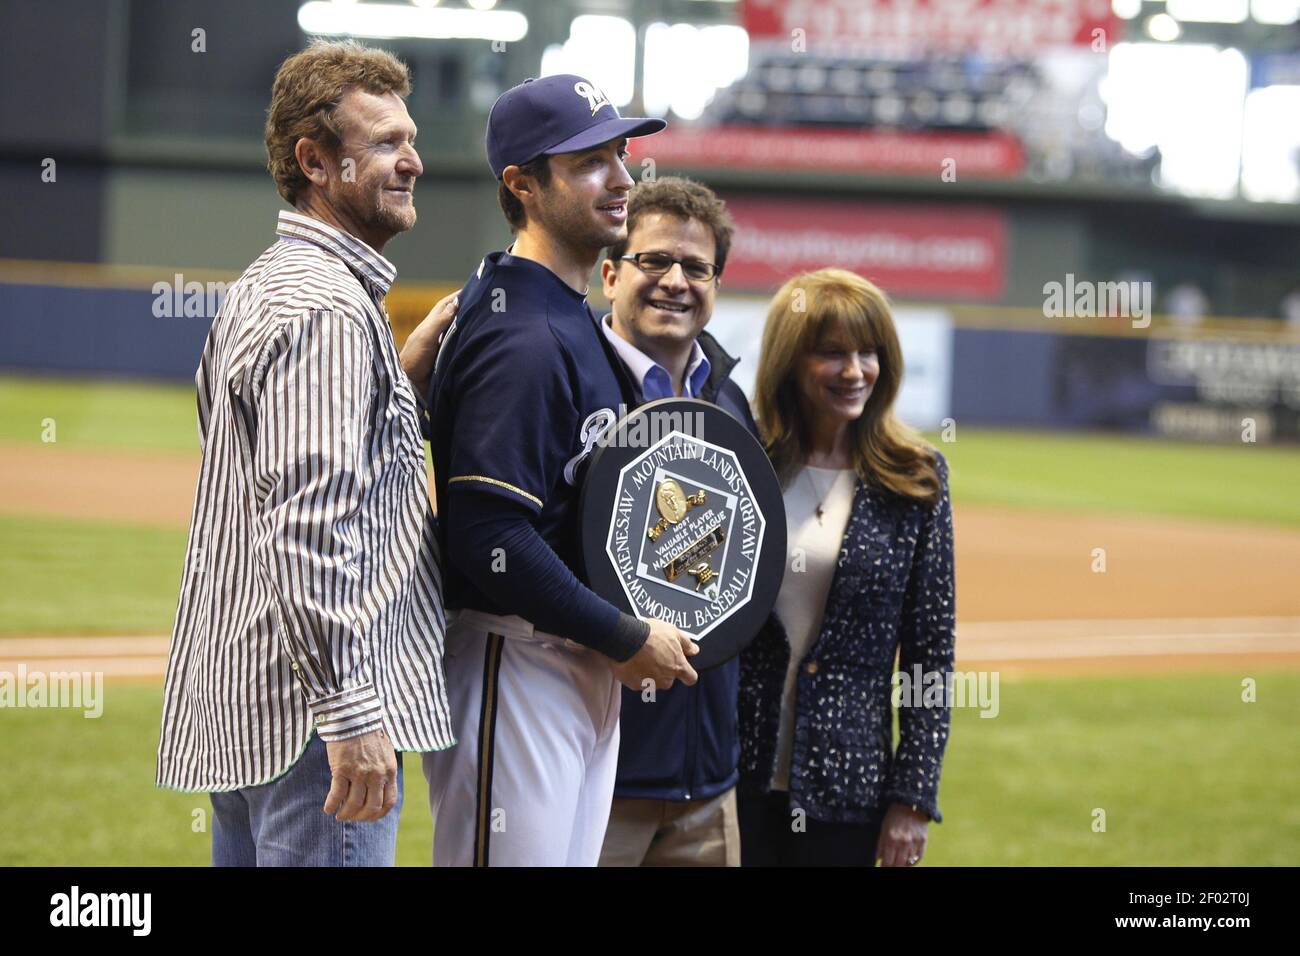 The Milwaukee Brewers' Ryan Braun is presented the National League MVP  award by Brewers owner Mark Attanasio, his wife, Debbie, and former Brewer  Robin Yount in ceremonies before the start of play